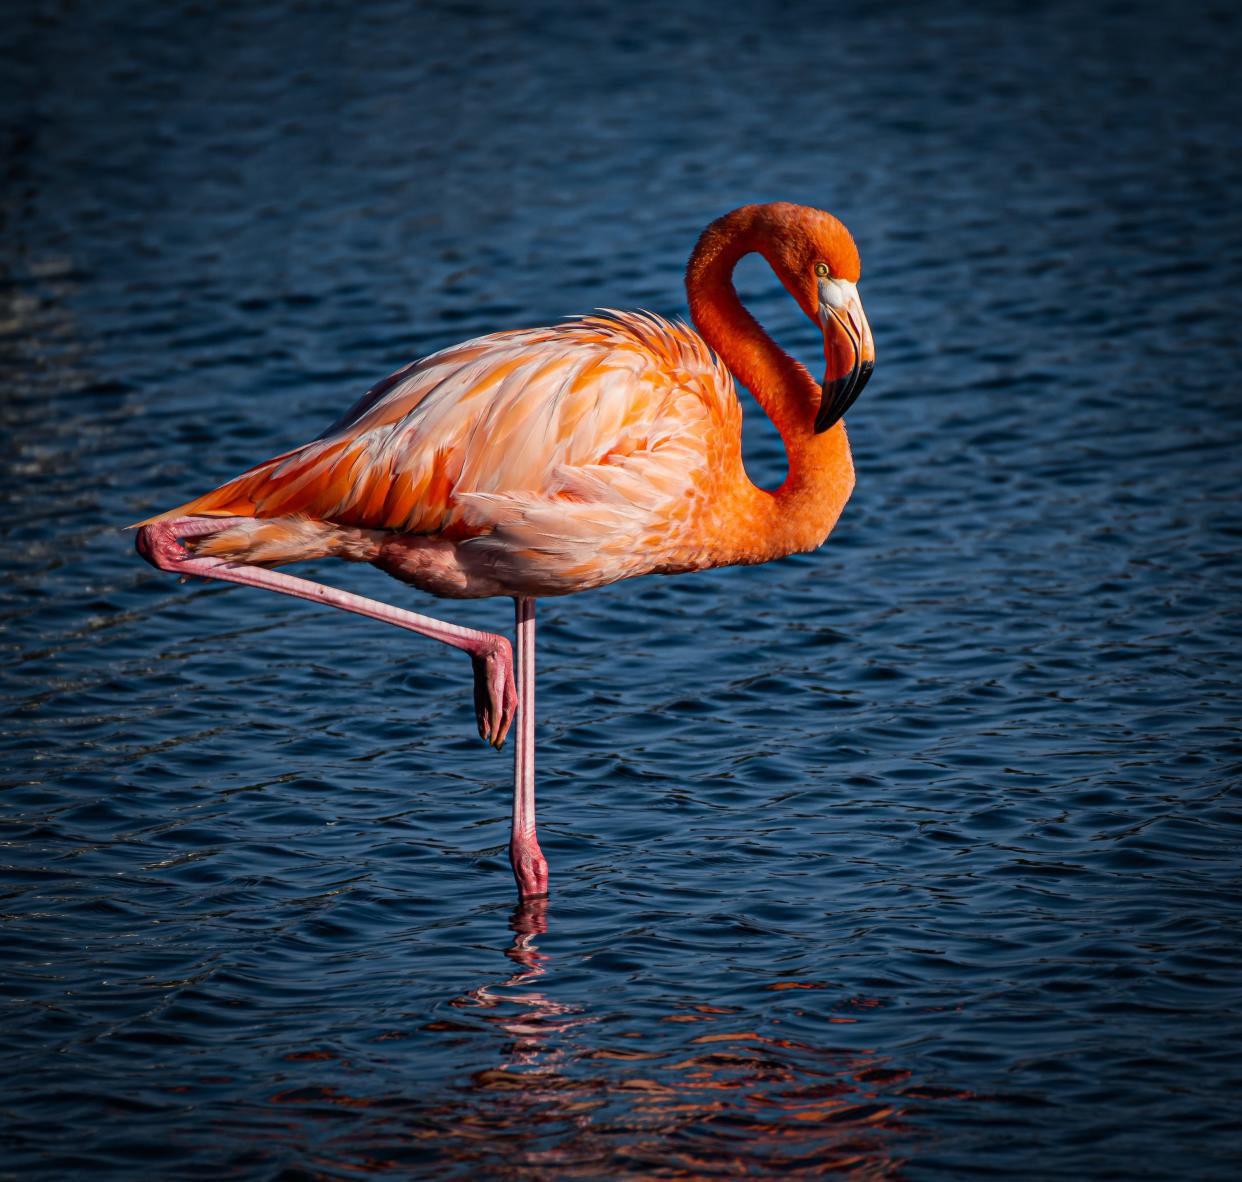 The flamingo population in Florida collasped in the early 20th century. A proposal now before the Legislature would name it the state bird.